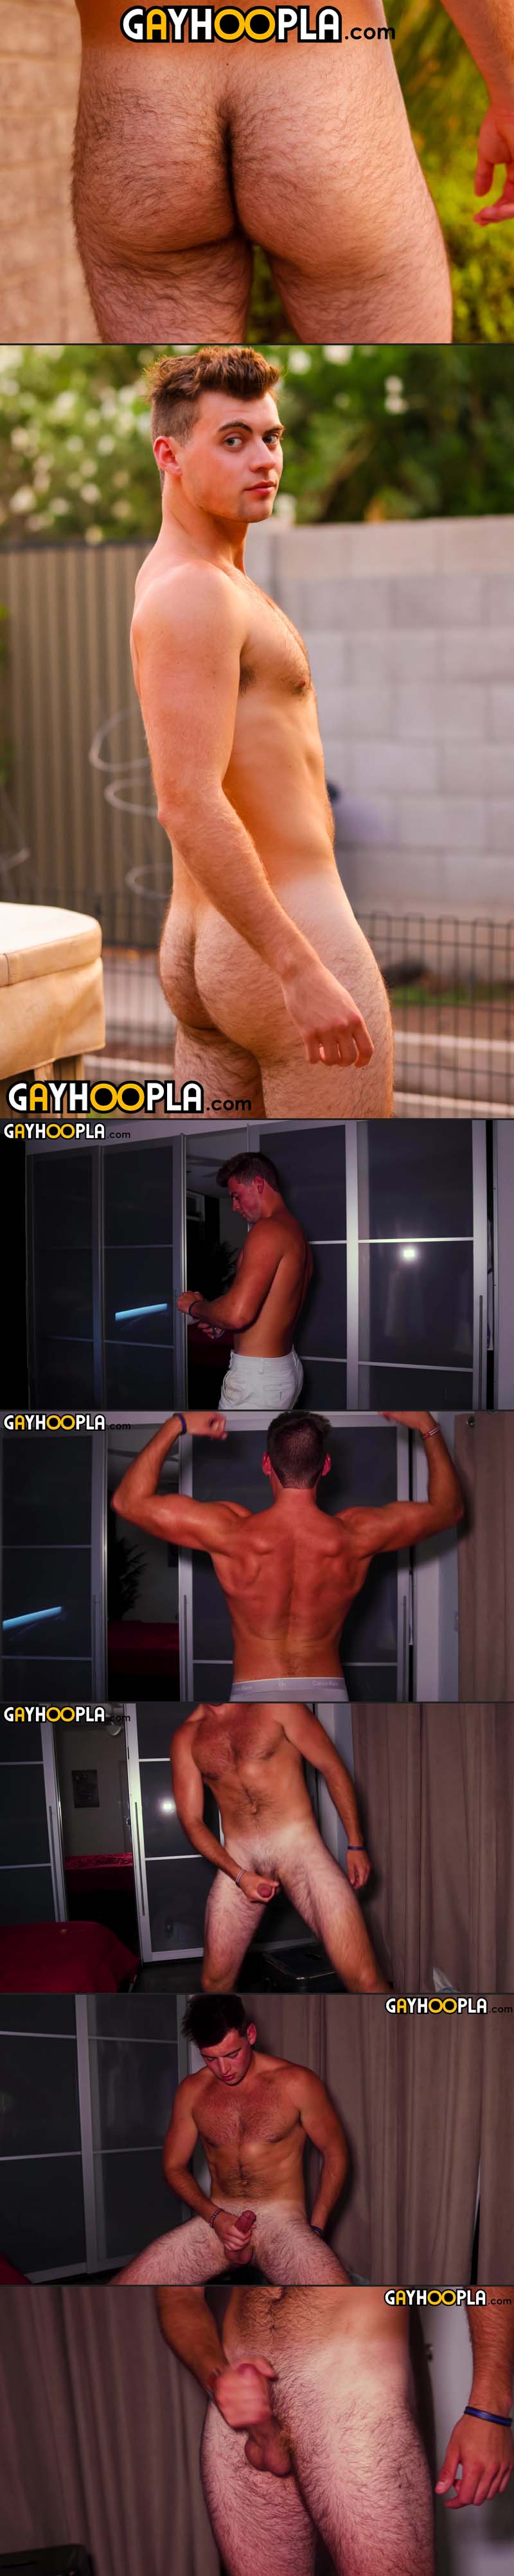 Luke Skyler [Tall, Tan and Handsome Teen Gets One Off After Hours!] at GayHoopla